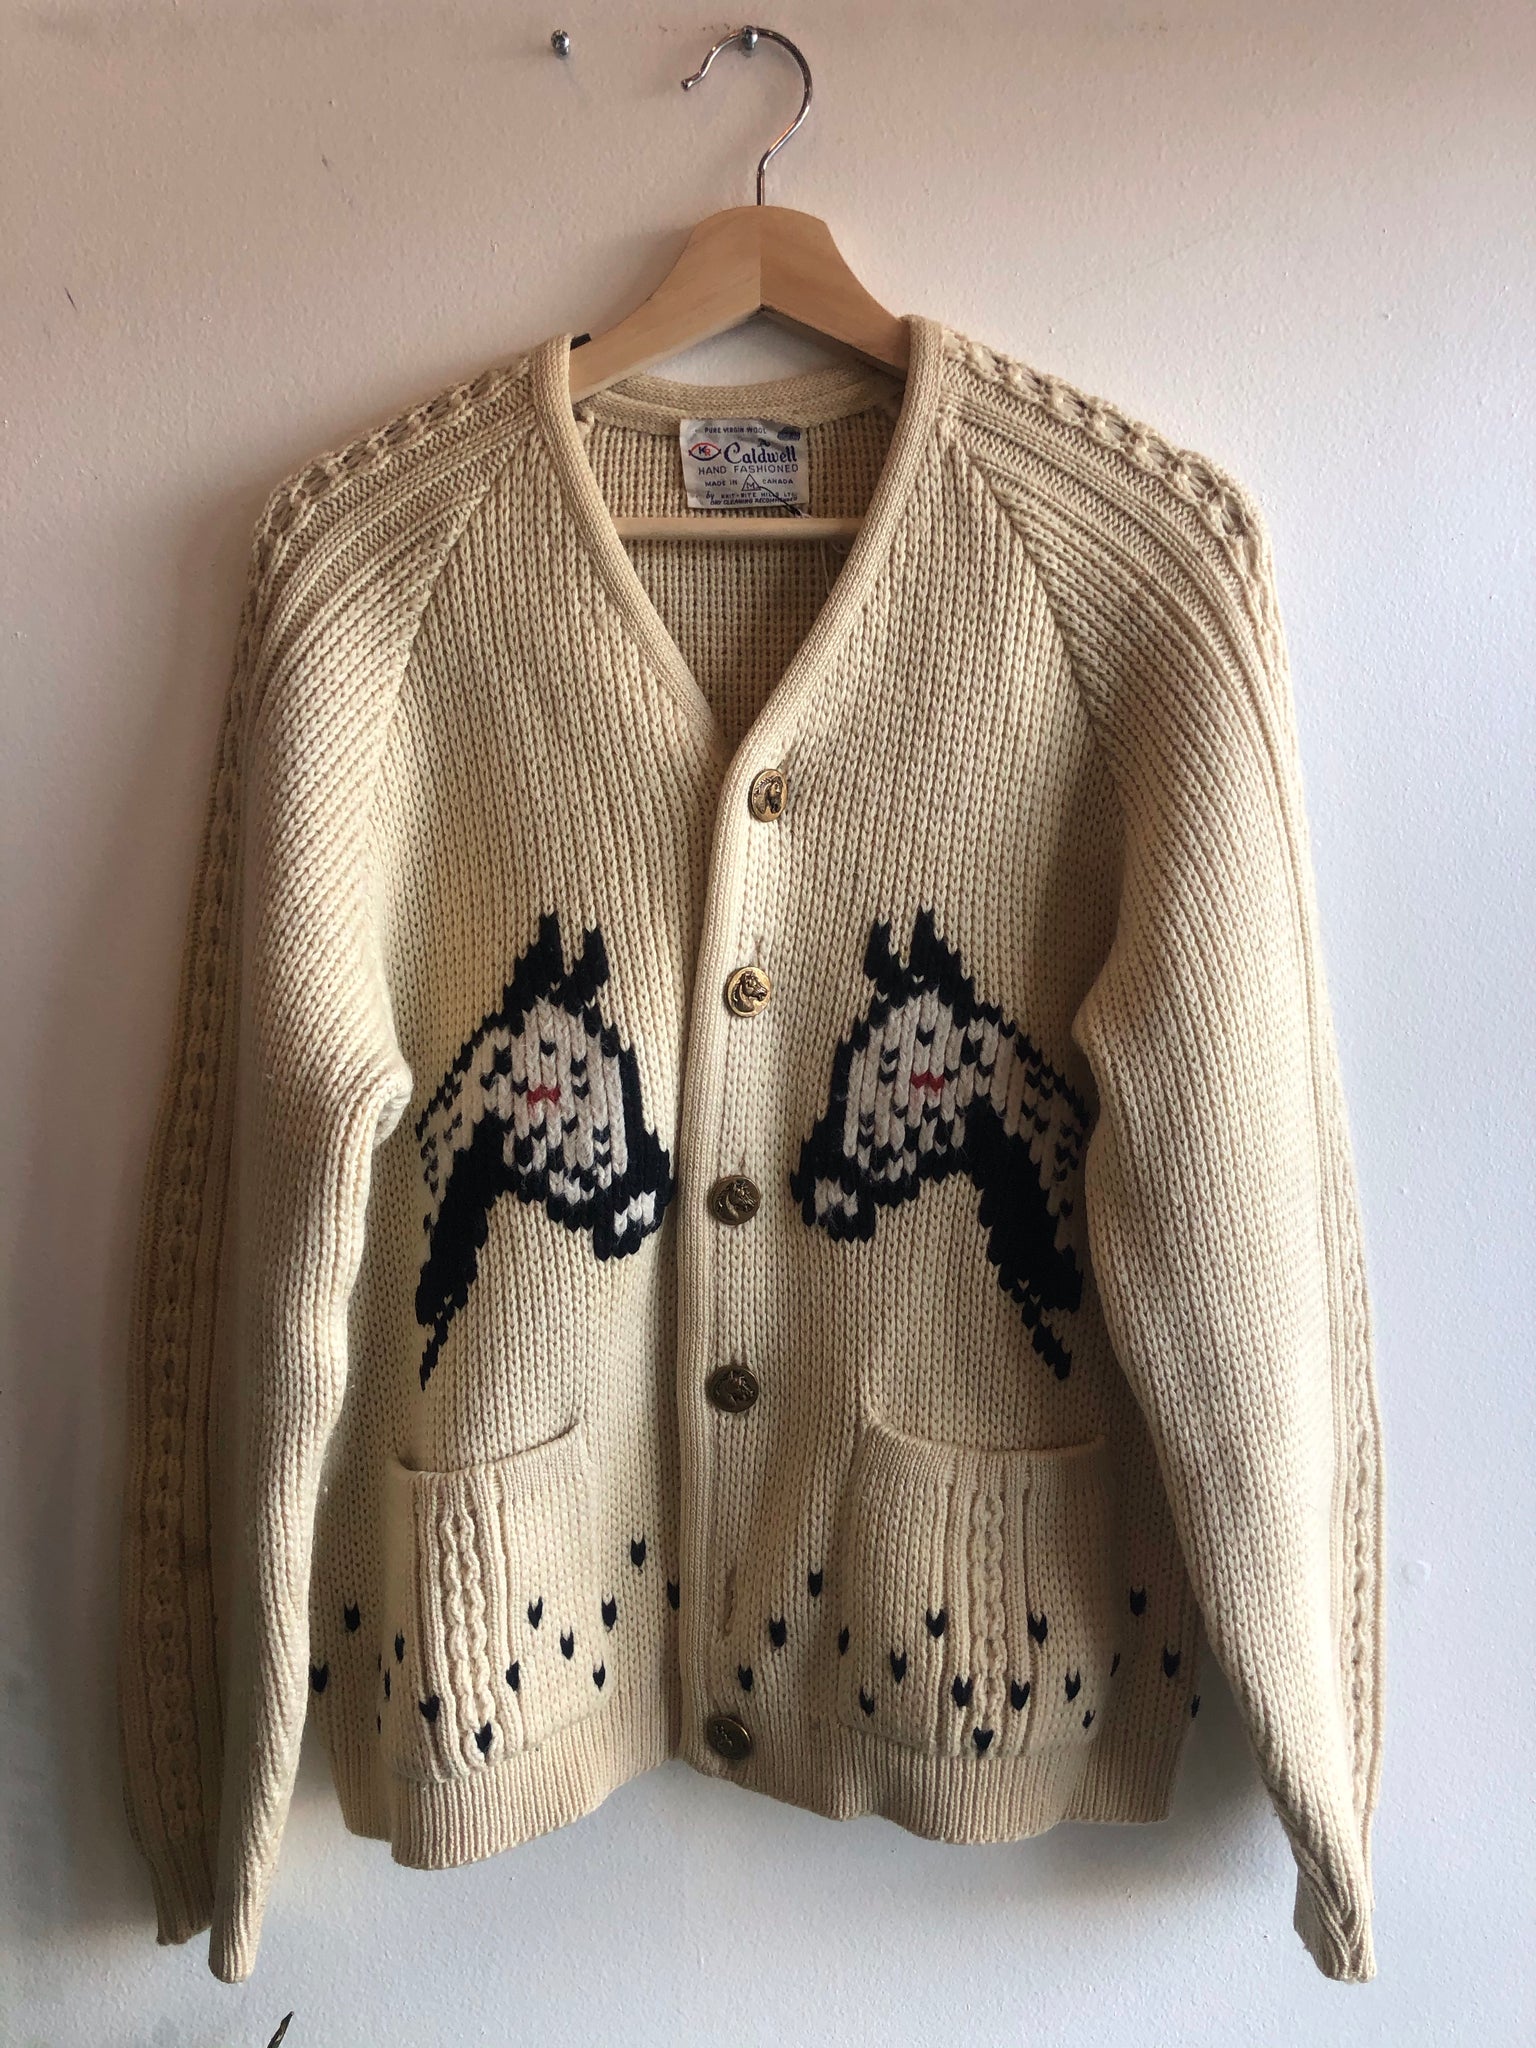 Vintage 1970’s Horse-Themed Cardigan Sweater